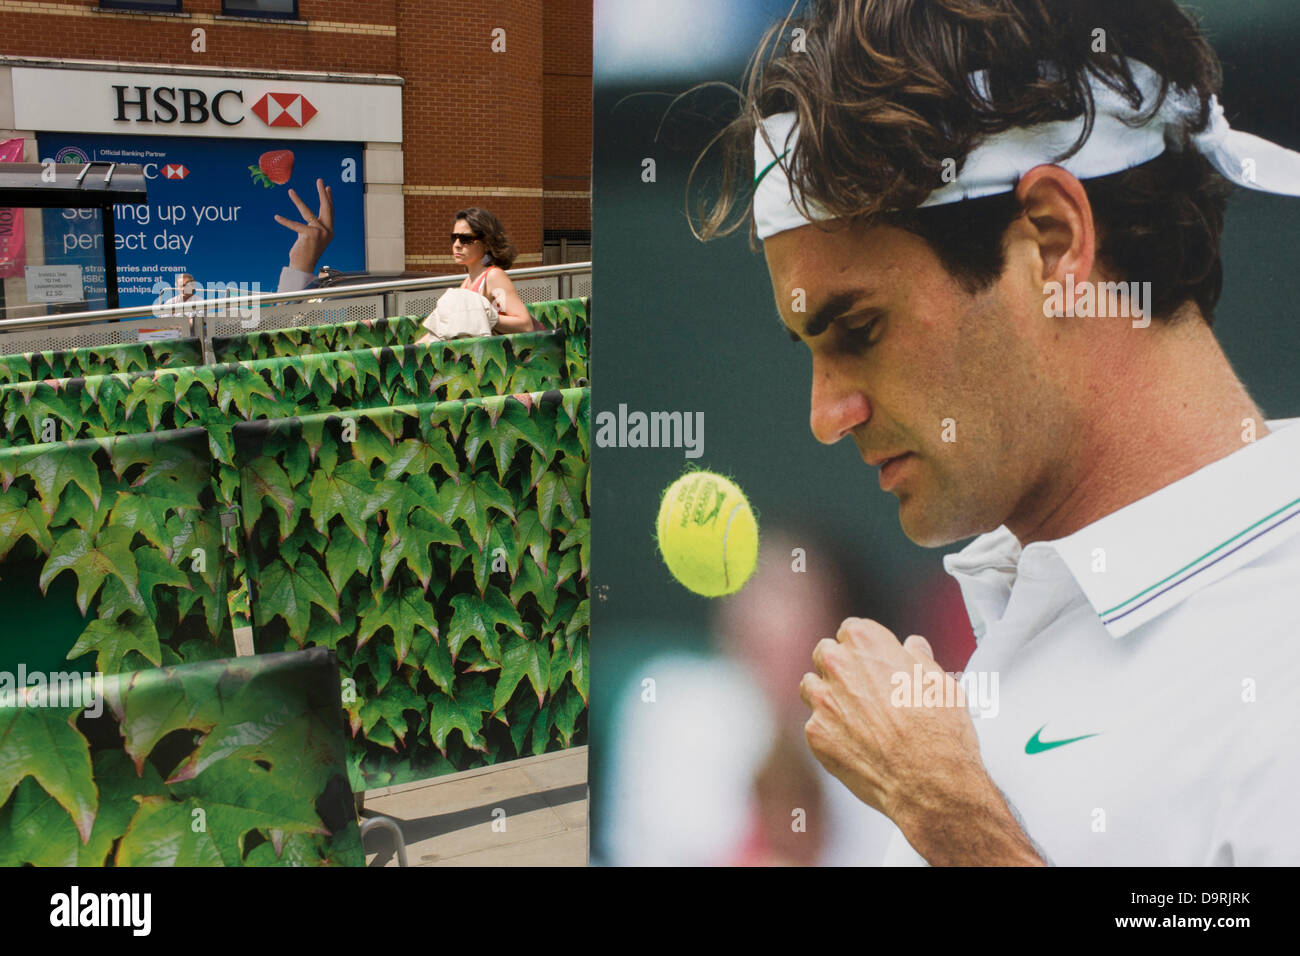 Wimbledon, England, 25th June 2013 - Day 2 of the annual lawn tennis championships and a poster of past Mens' champion Roger Federer outside the mainline and underground (subway) station in the south London suburb. The Wimbledon Championships, the oldest tennis tournament in the world, have been held at the nearby All England Club since 1877. Stock Photo